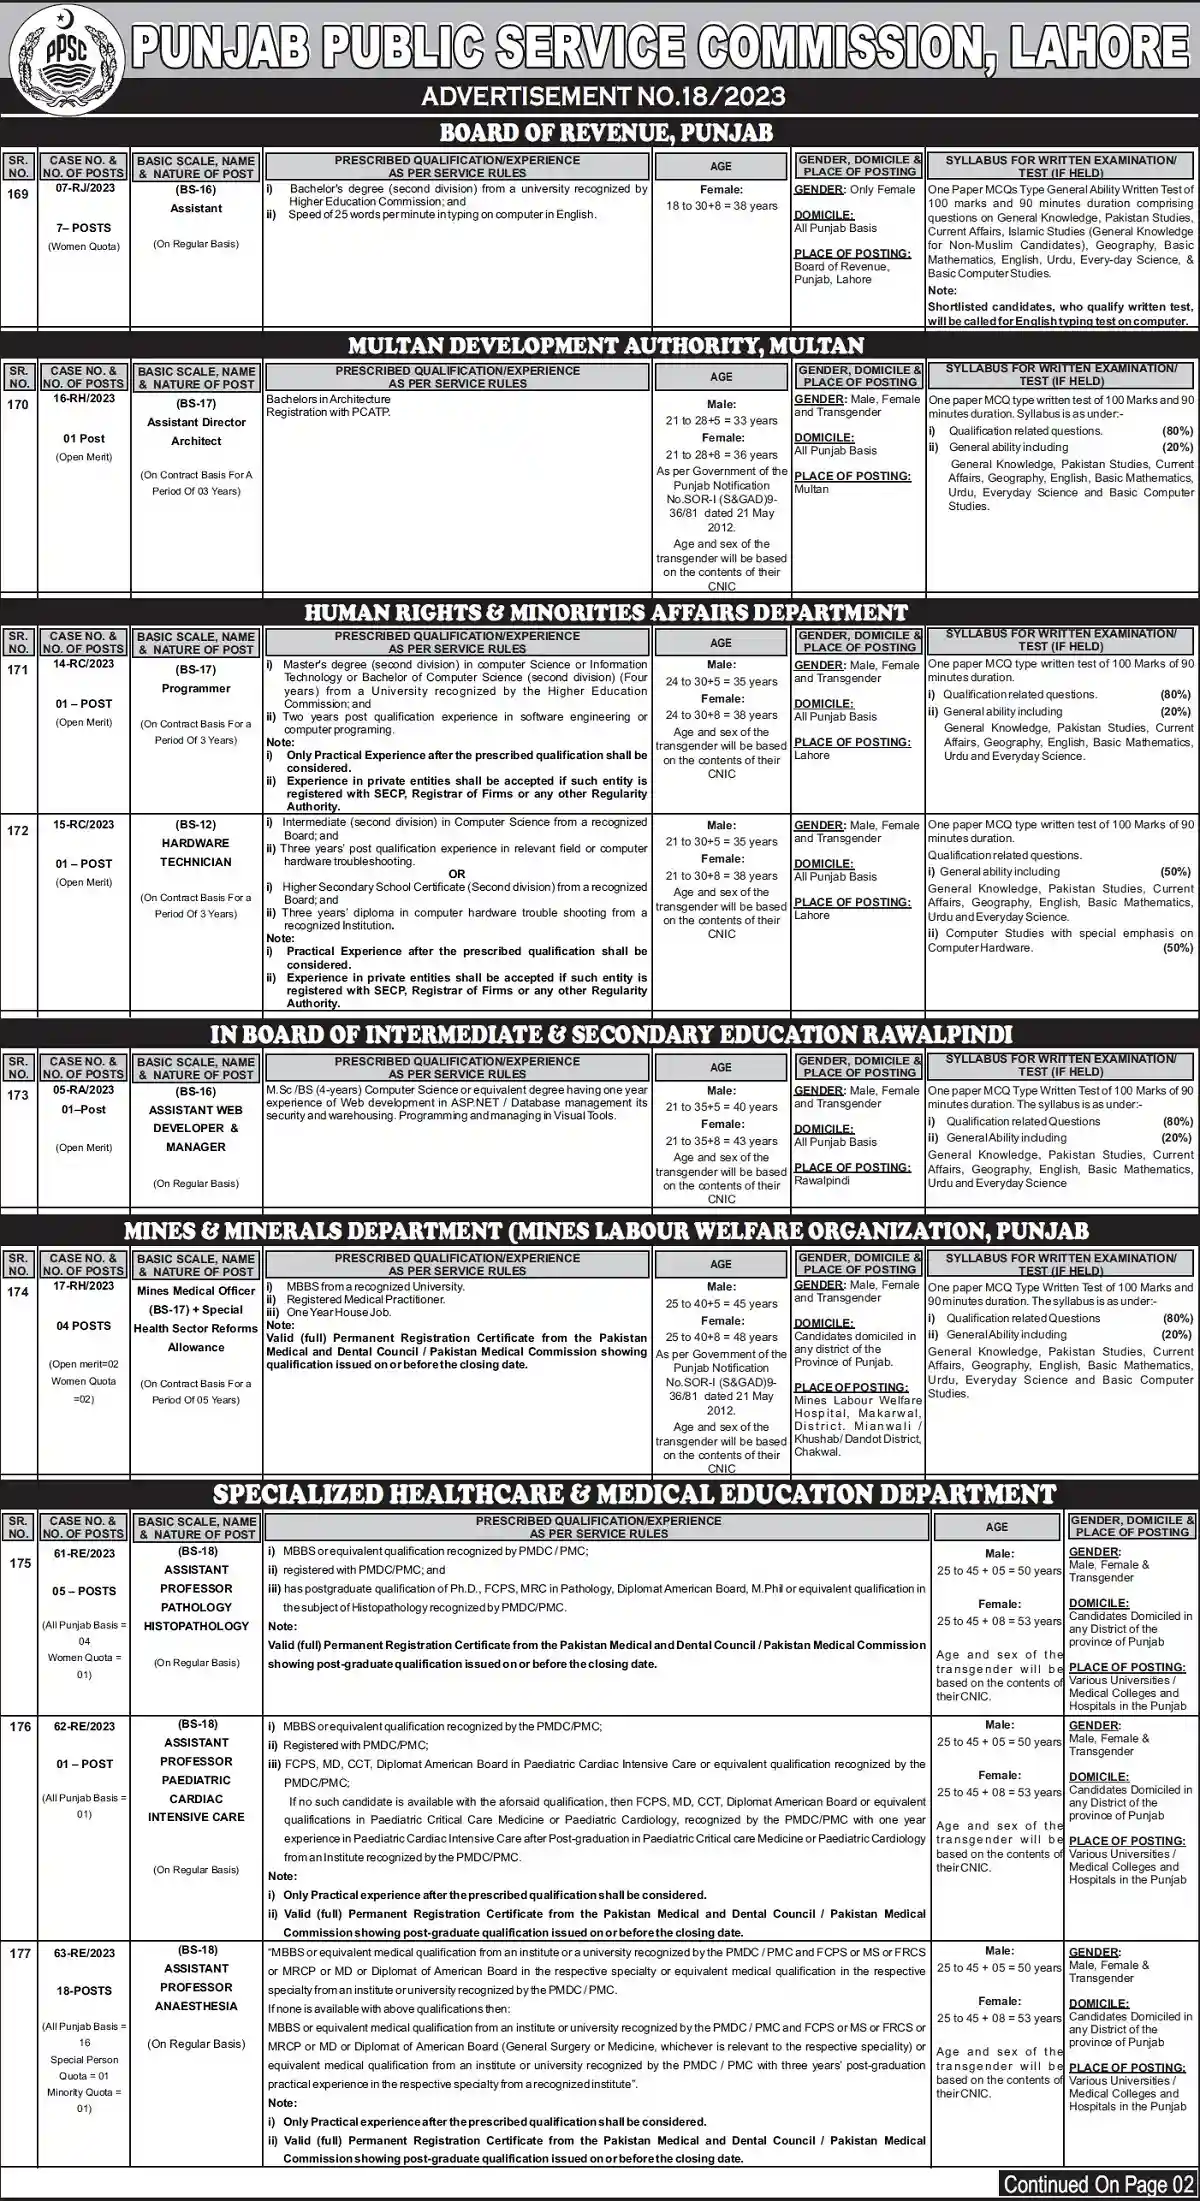 Ppsc Jobs 2023 Advertisement No 18/2023 Tehsildar And Other Posts